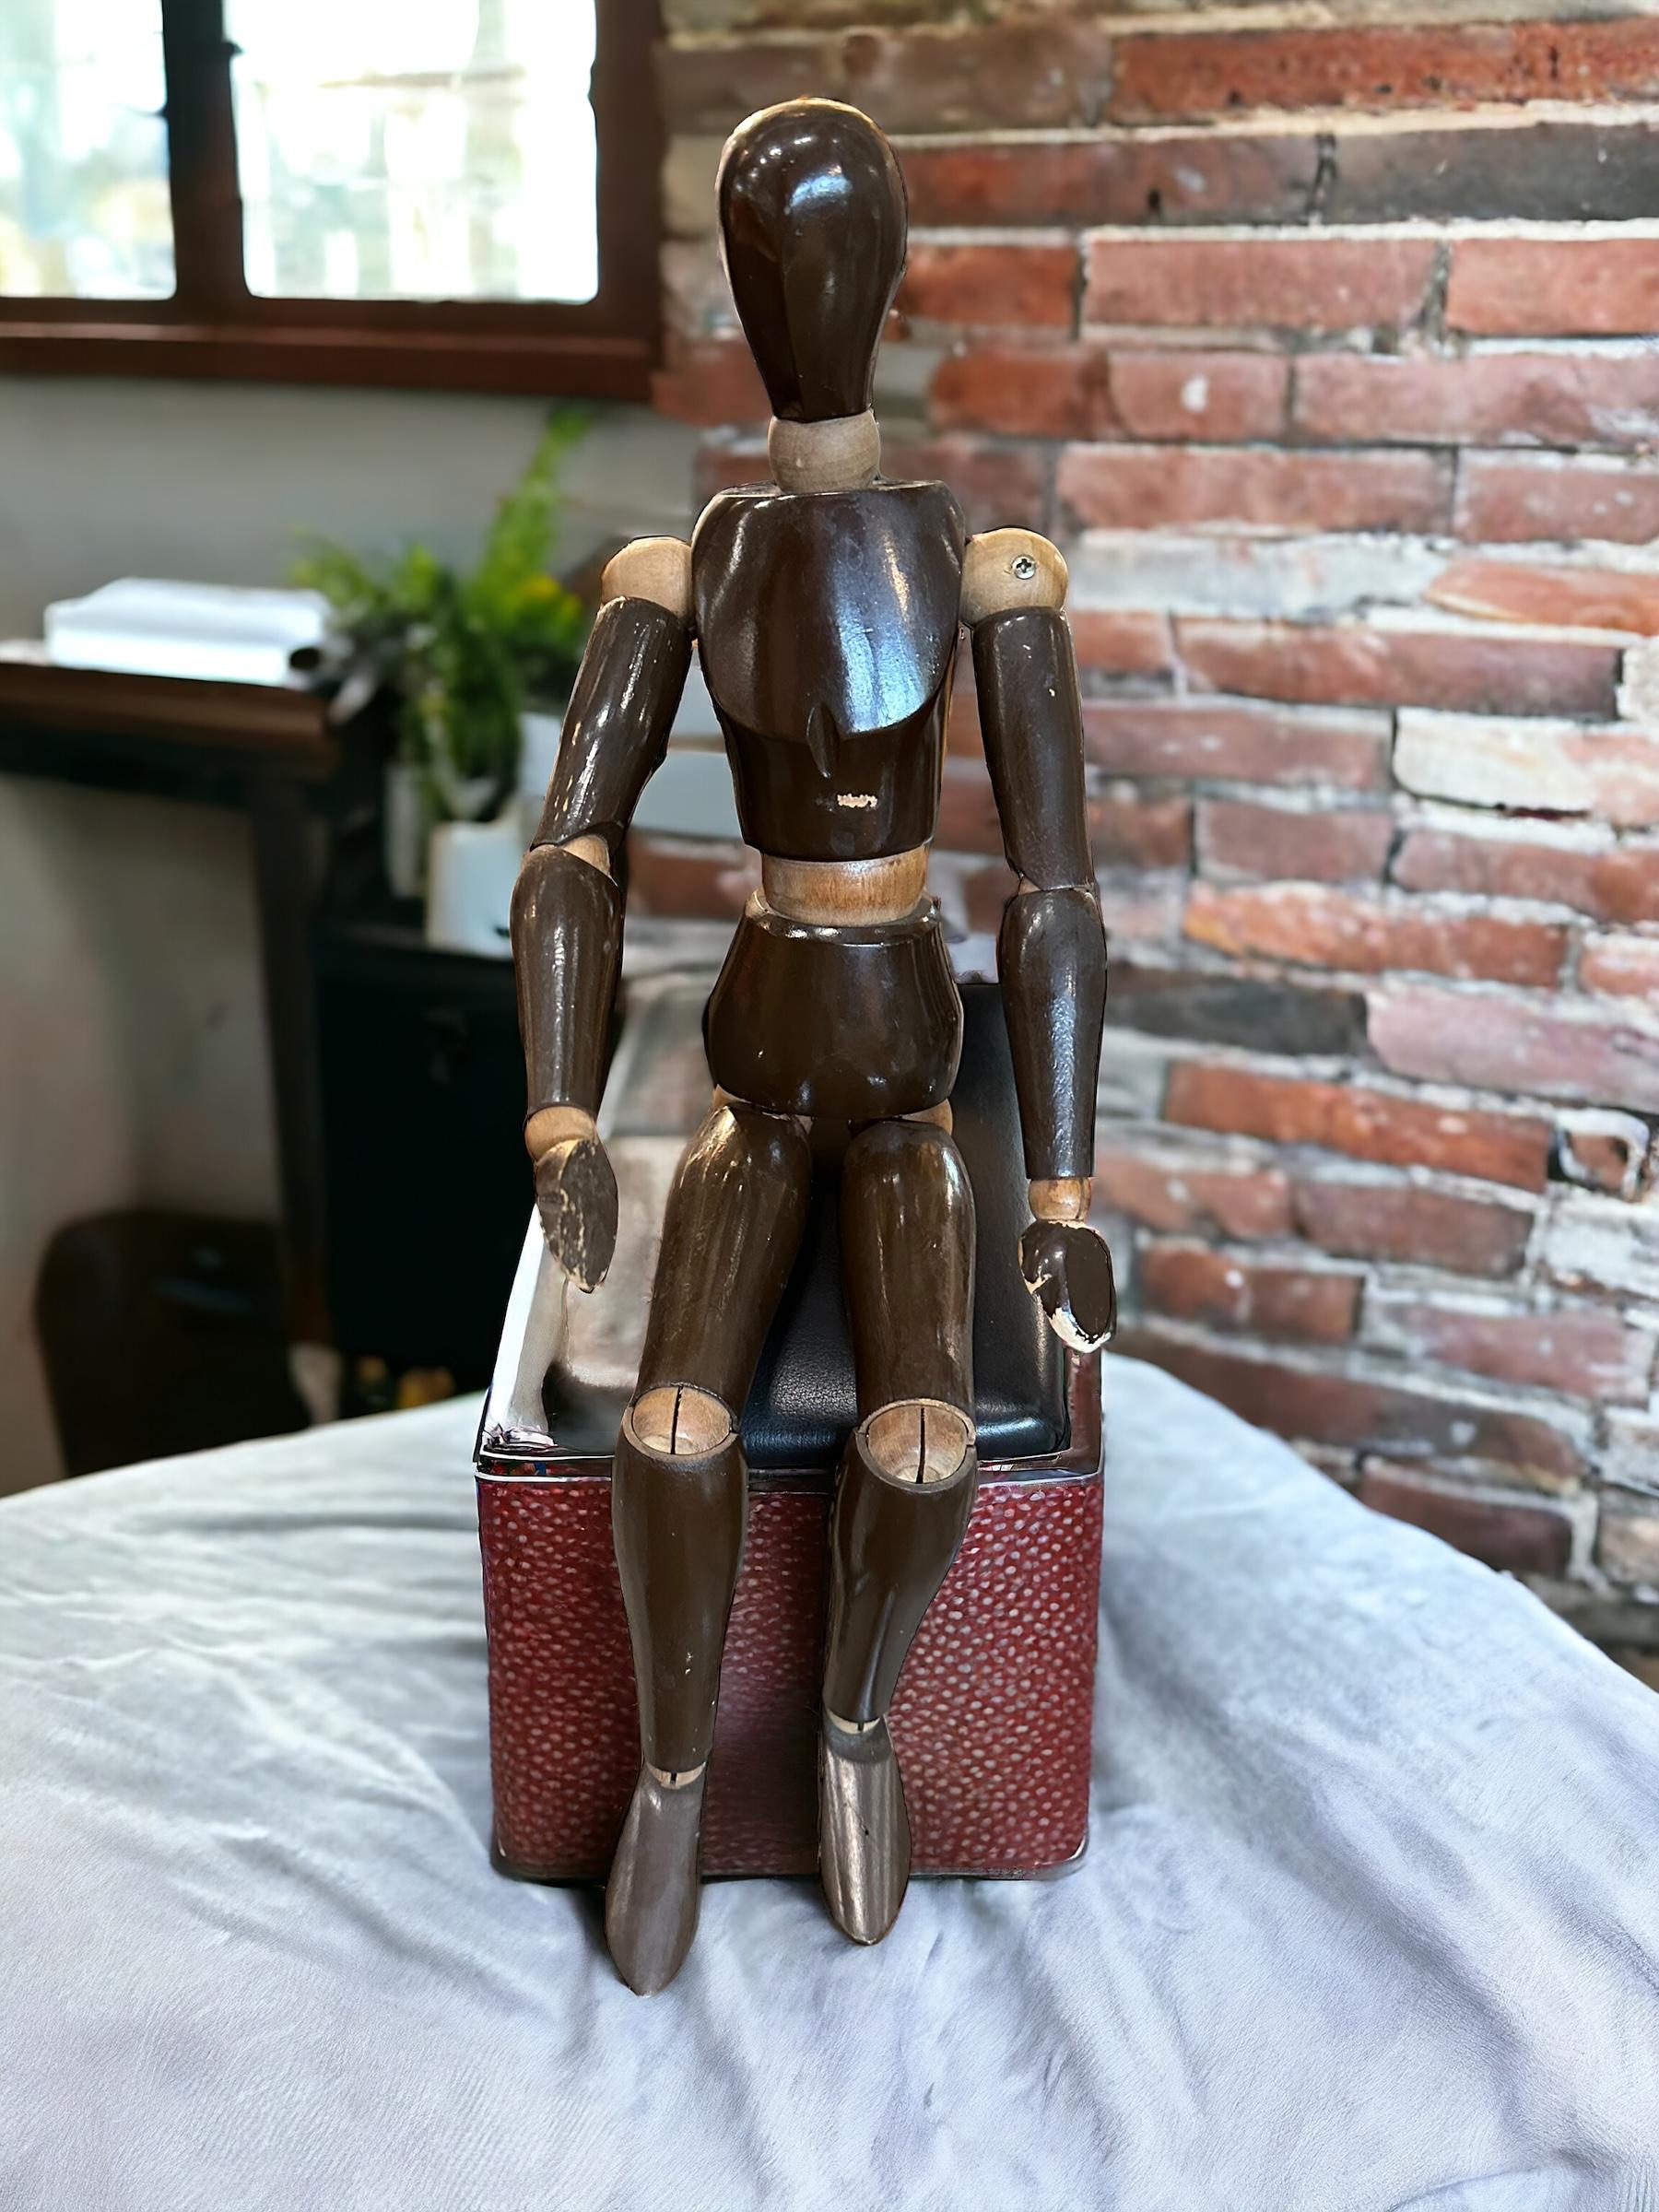 A handmade wooden Artist mannequin model - all joints move as they should. Found on a Estate sale in Modena, Italy.
Shows some minor wear - but looks beautiful on display! Some scratches and a nice patina due to the age. A nice addition to any room.